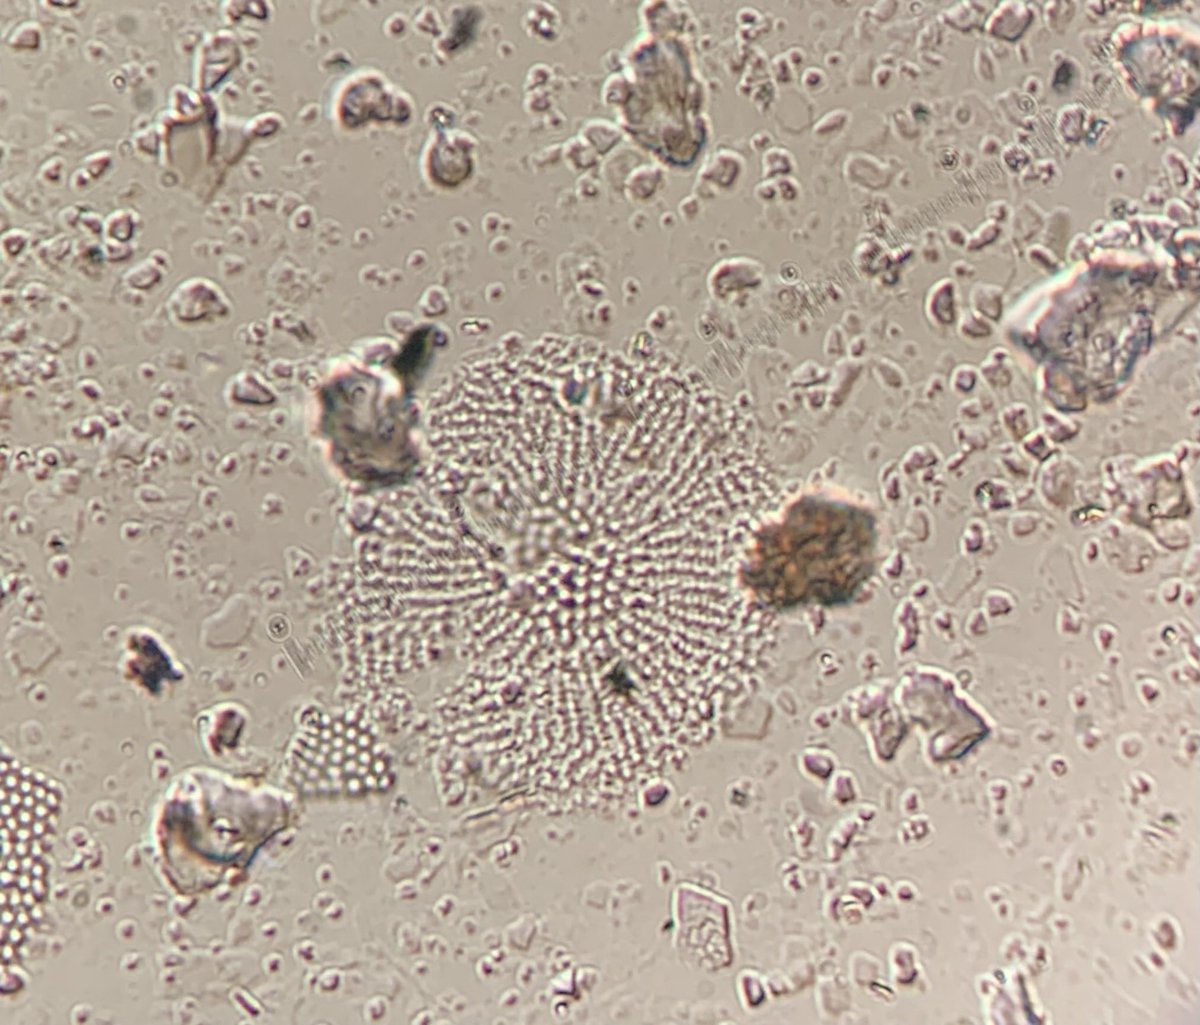 Some days I take photos of ugly #diatoms and wonder what they are… #BeringSea